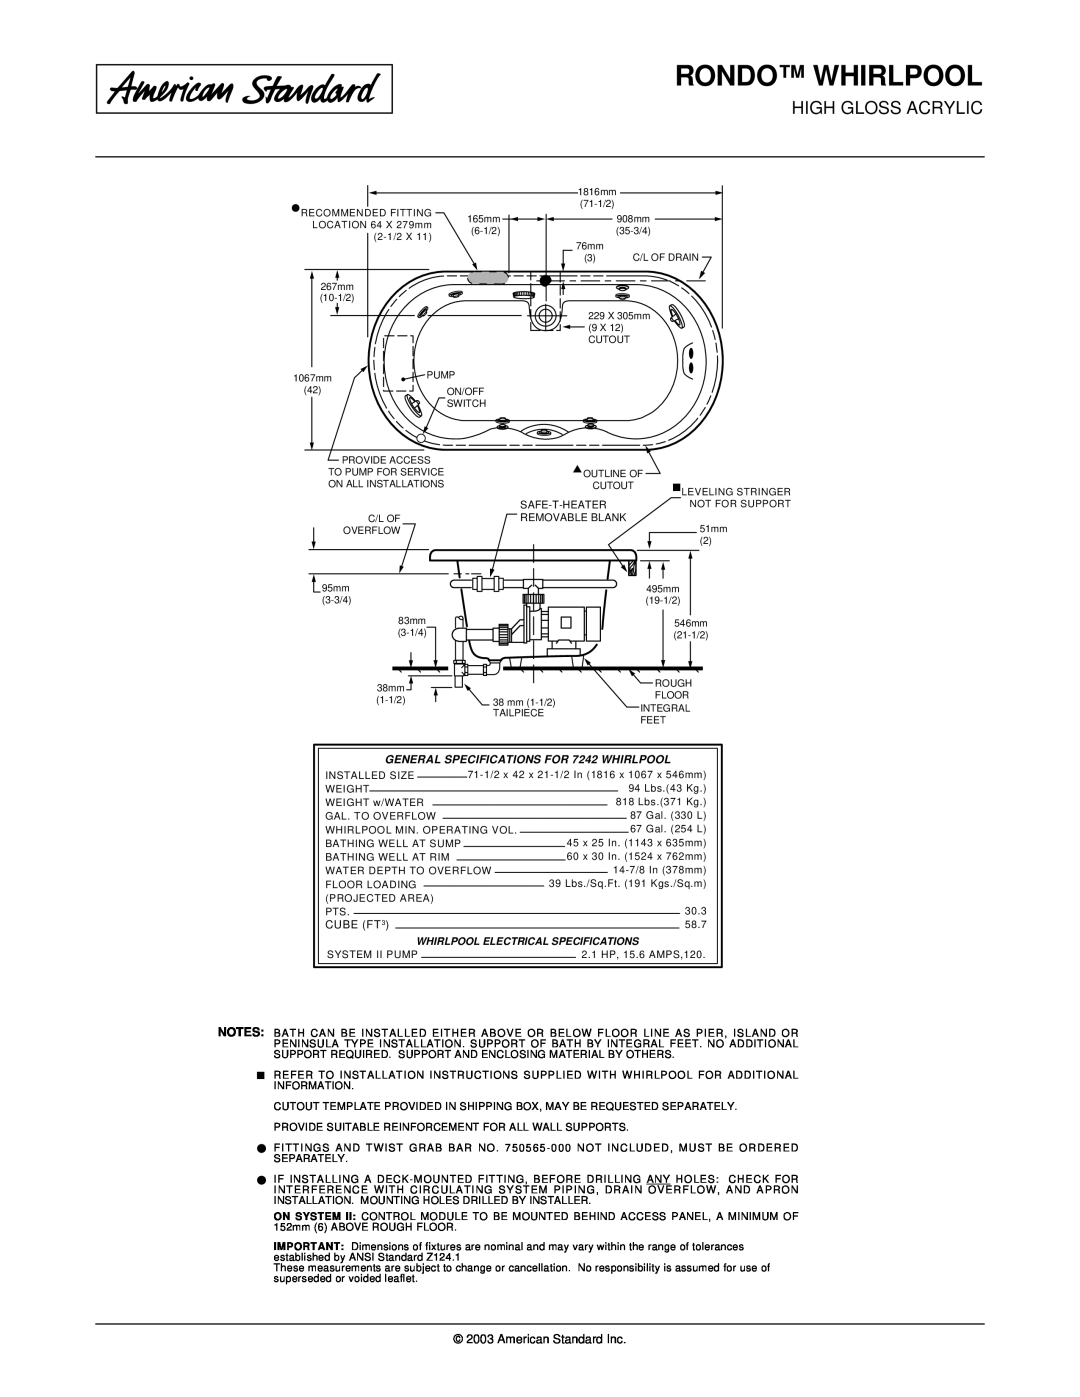 American Standard 7242.028WC Rondo Whirlpool, American Standard Inc, GENERAL SPECIFICATIONS FOR 7242 WHIRLPOOL 